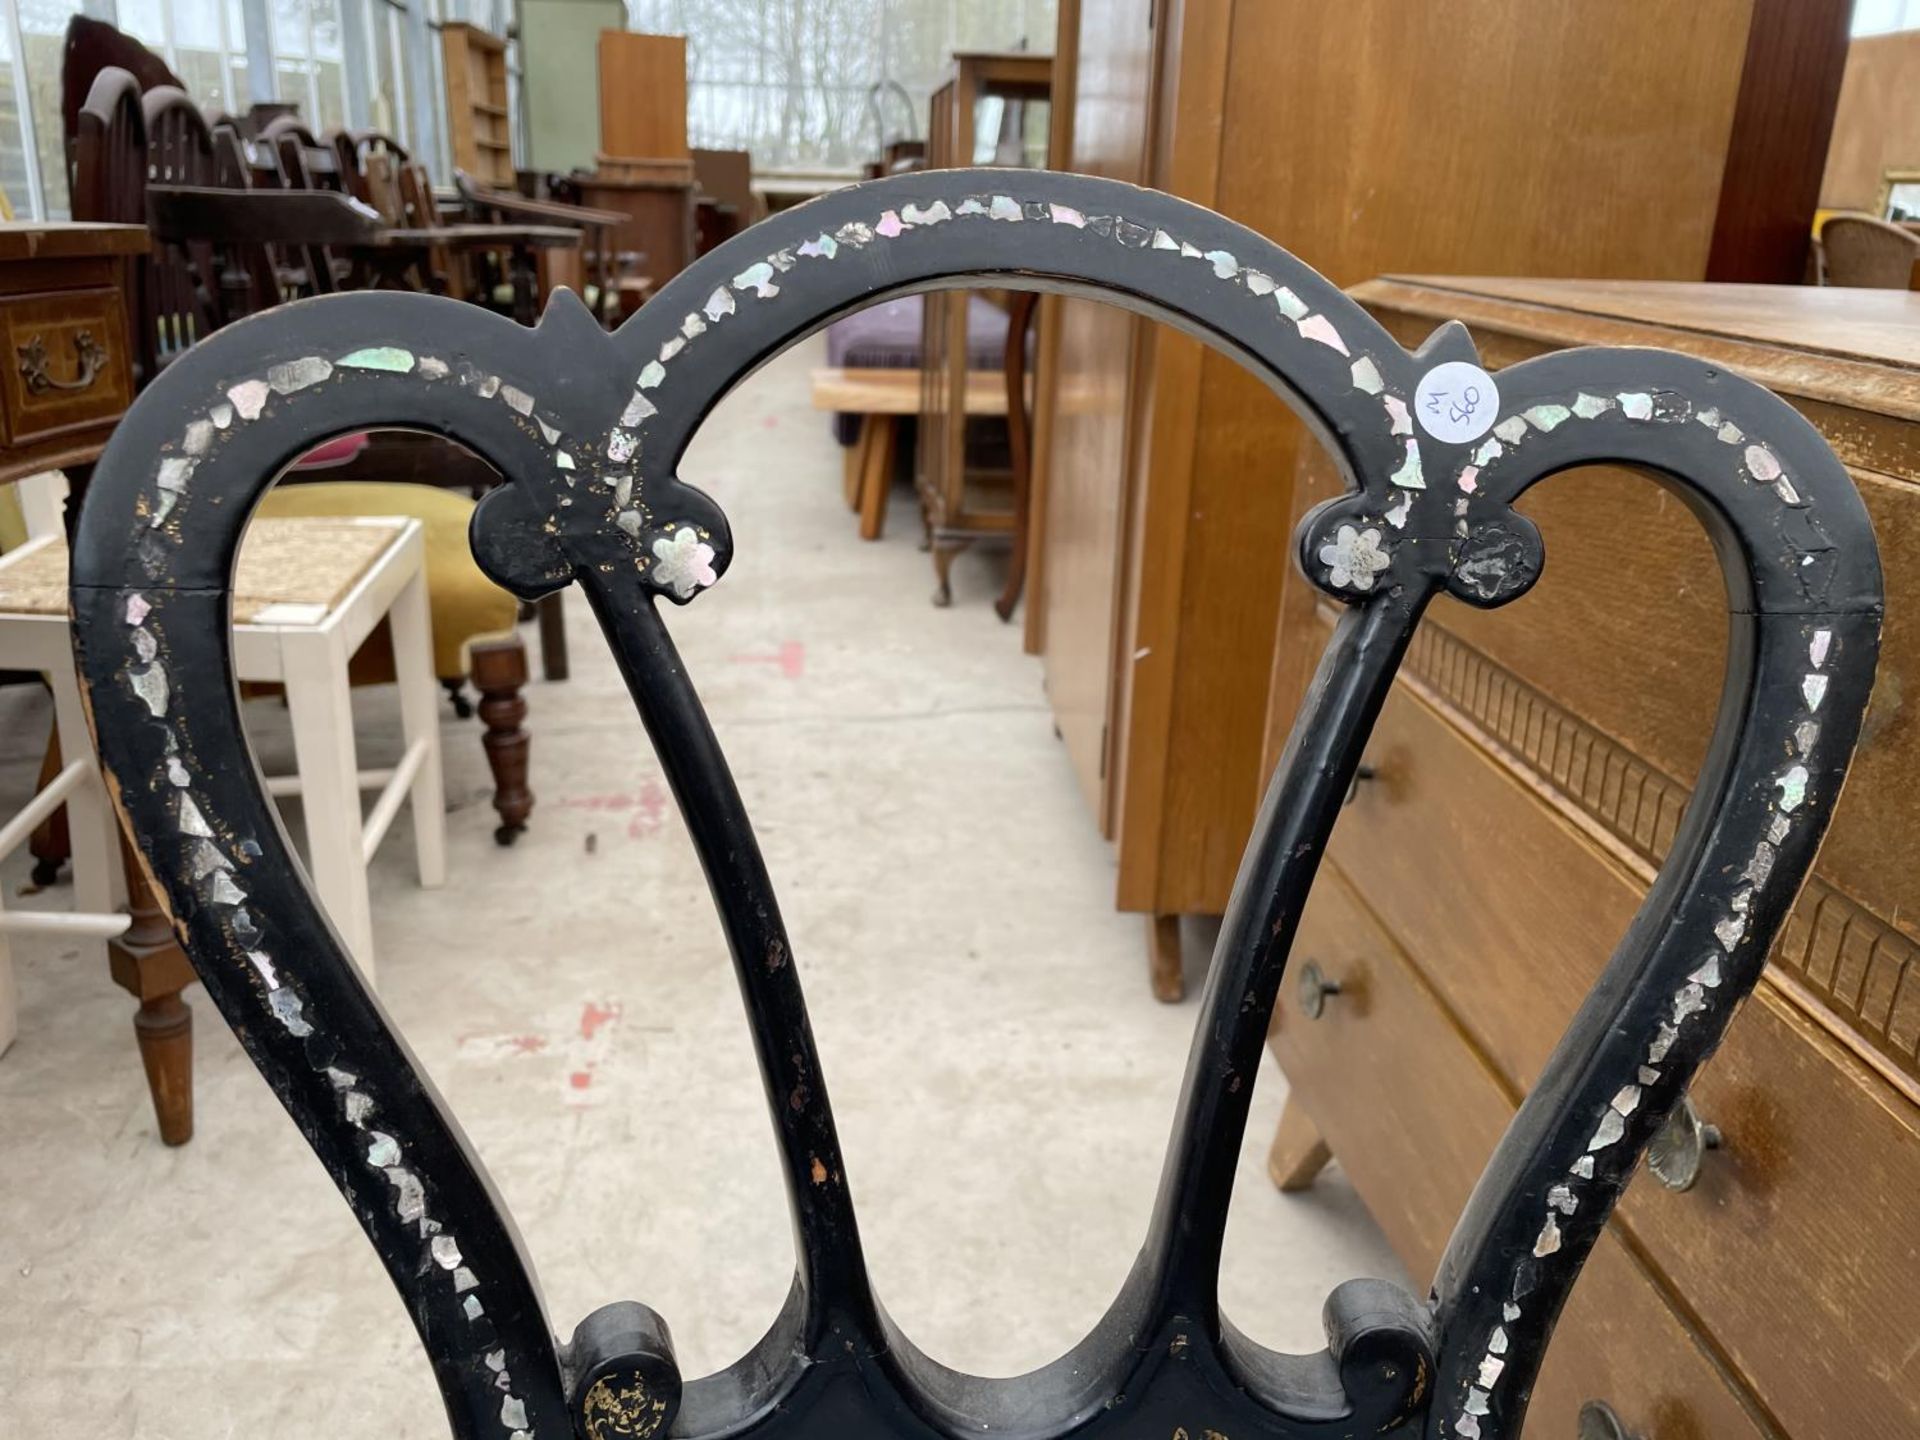 TWO VICTORIAN EBONISED BEDROOM CHAIRS WITH MOTHER OF PEARL INLAY - Image 6 of 9